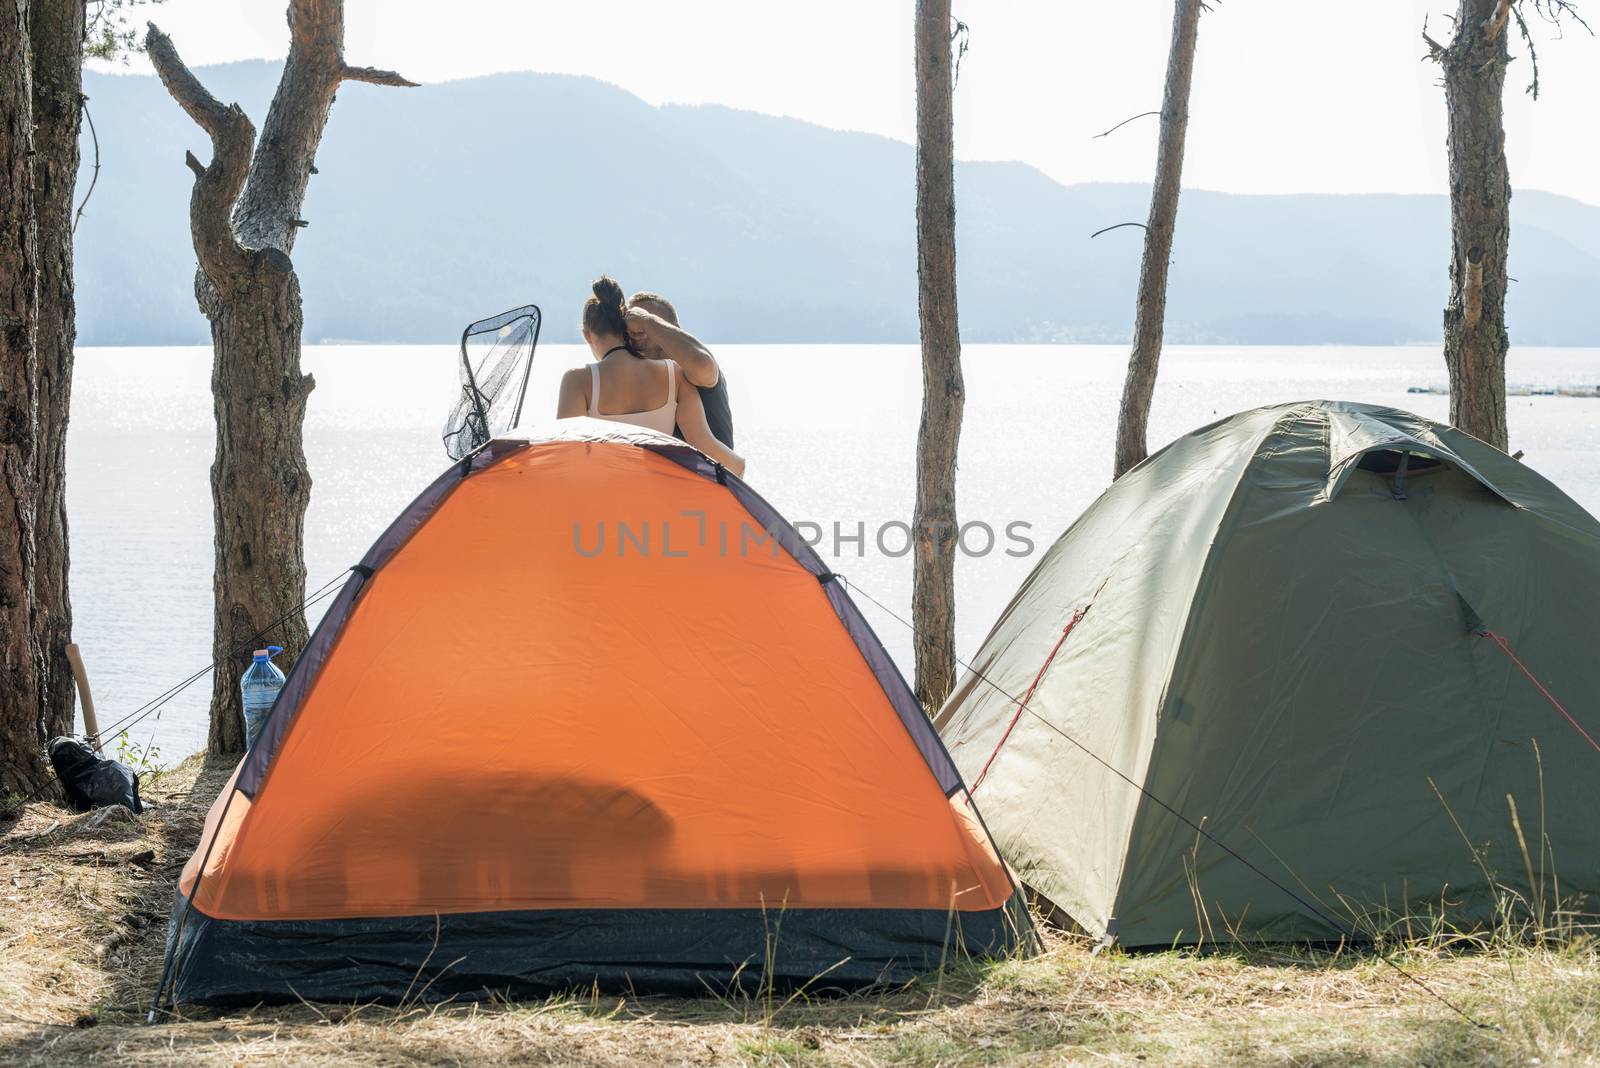 Boy and girl on a campsite. Fishing